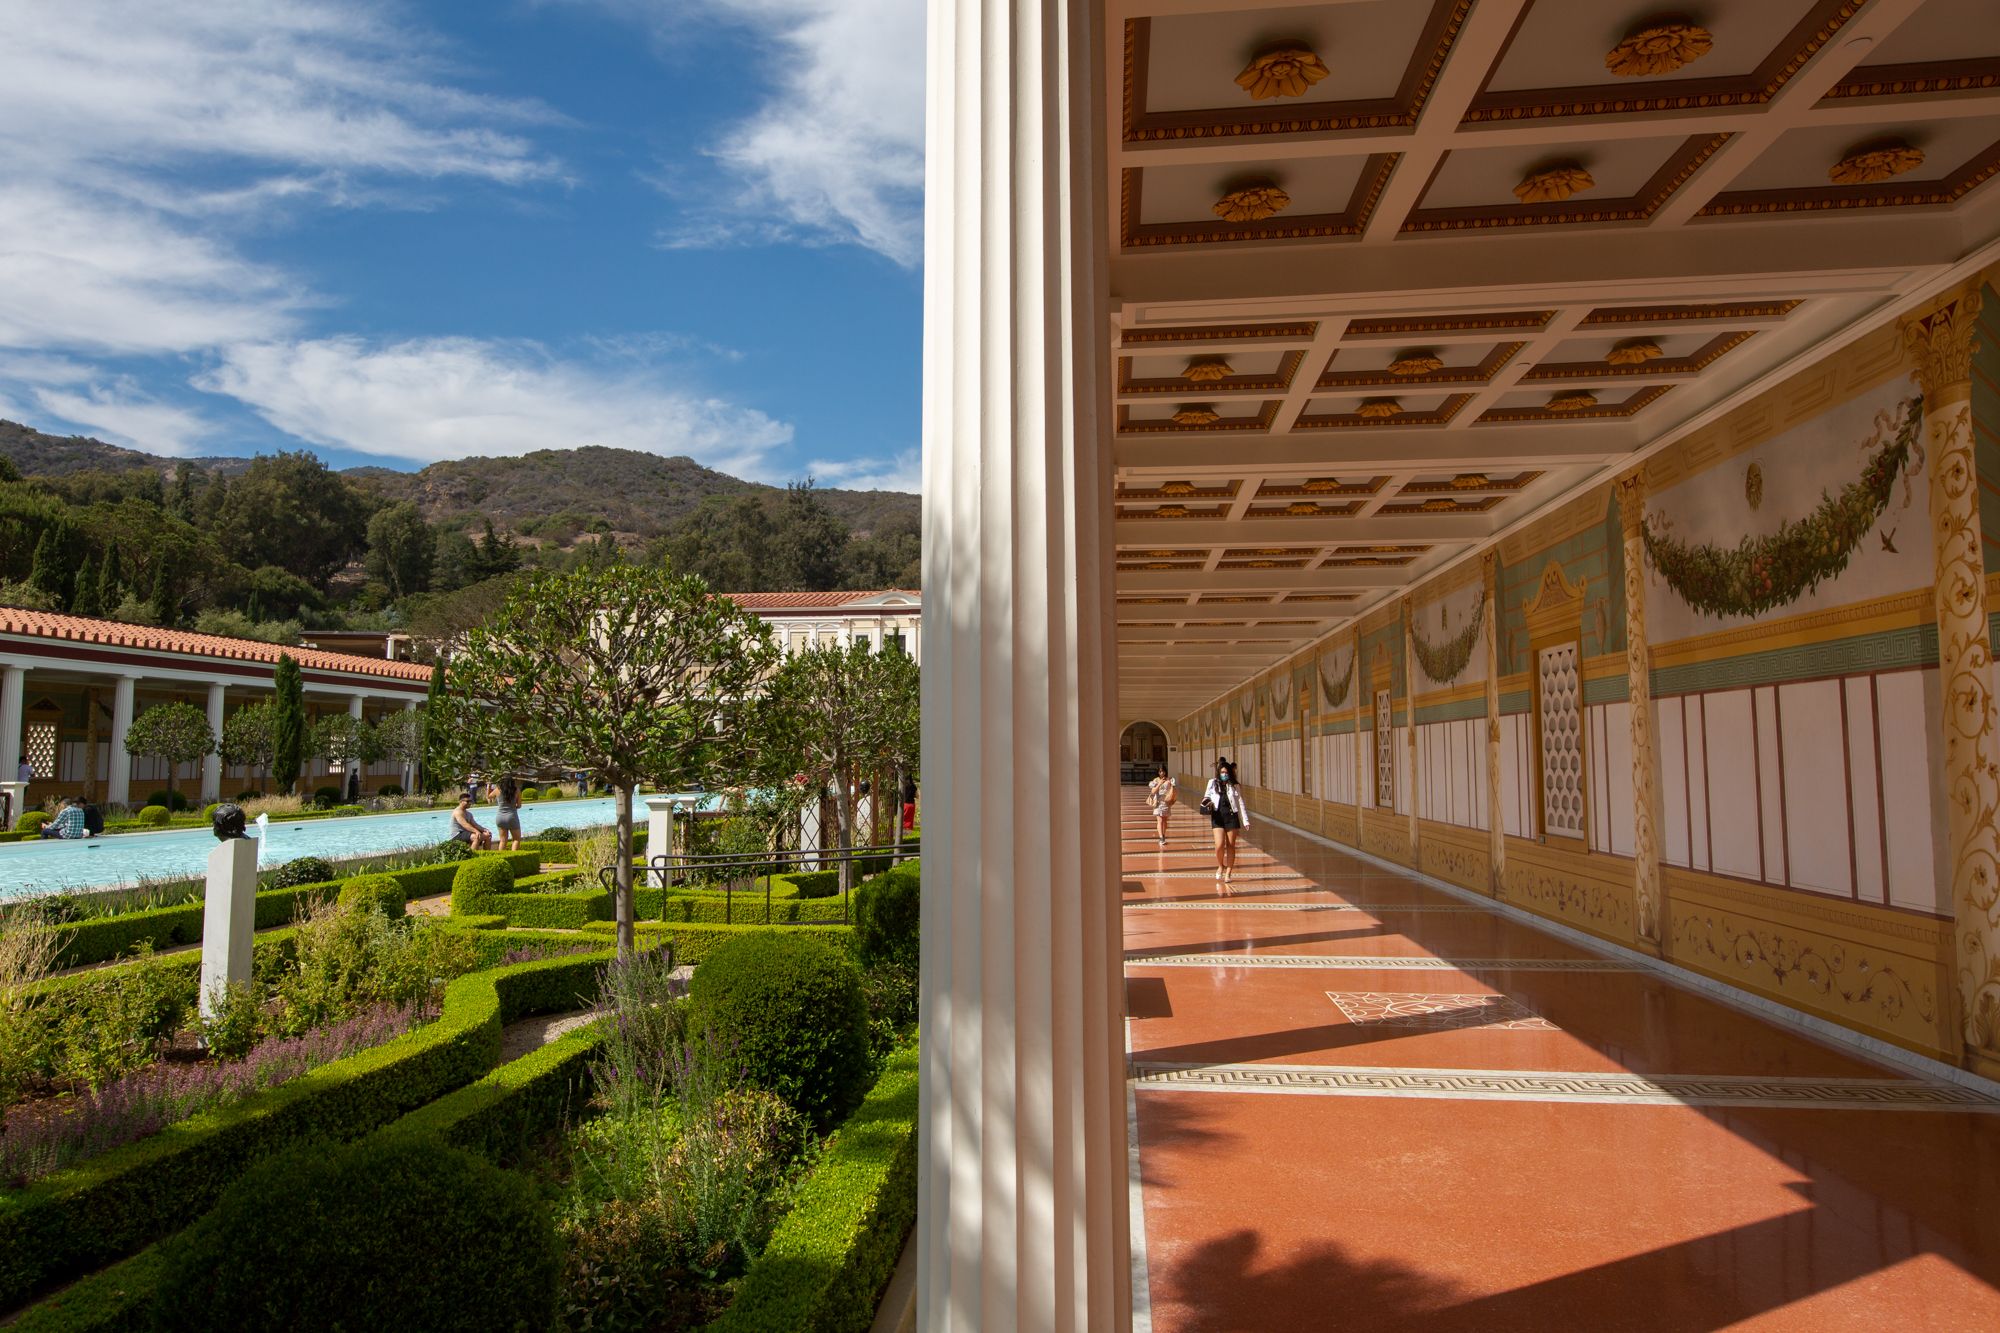 Between two worlds at the Getty Villa